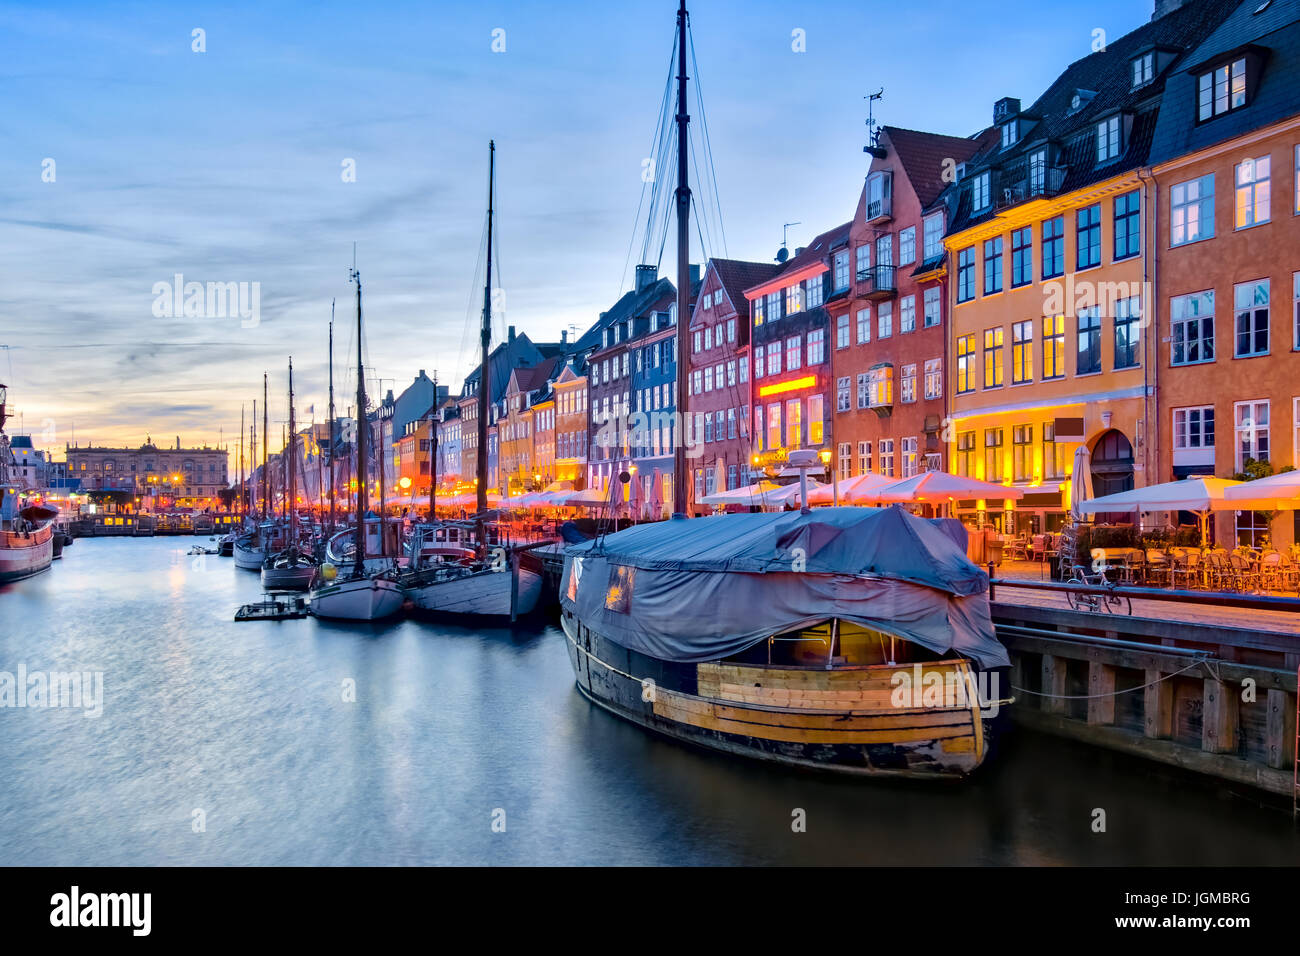 Nyhavn with its picturesque harbor with old sailing ships and colorful facades of old houses in Copenhagen, Denmark. Stock Photo